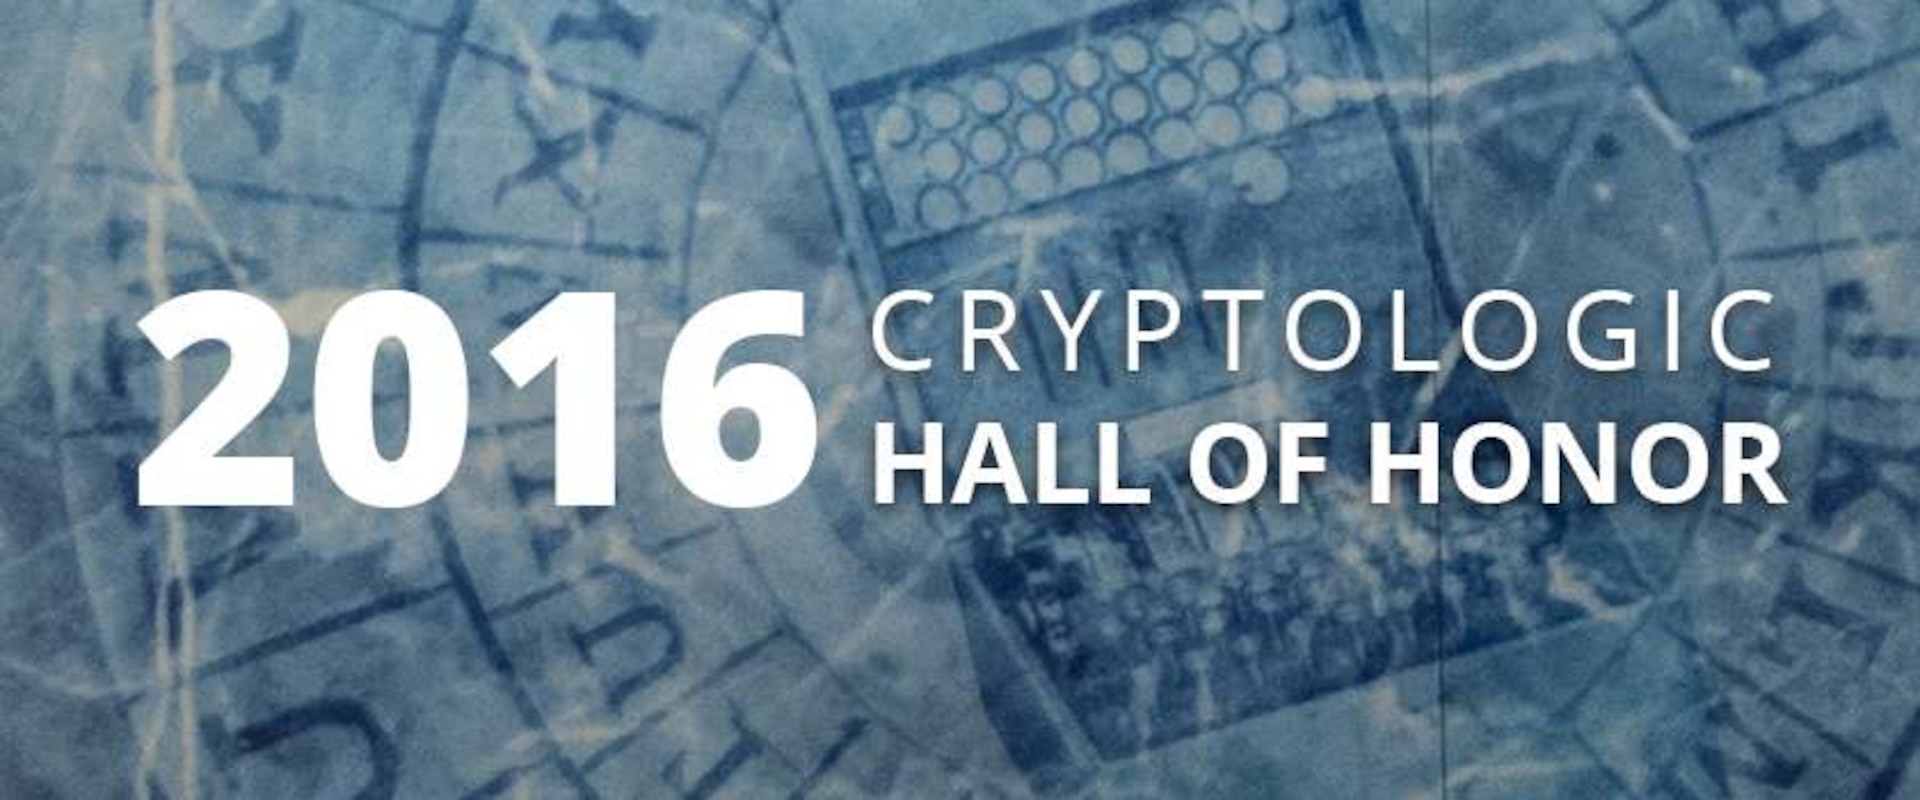 Cryptologic Hall of Honor 2016 title text